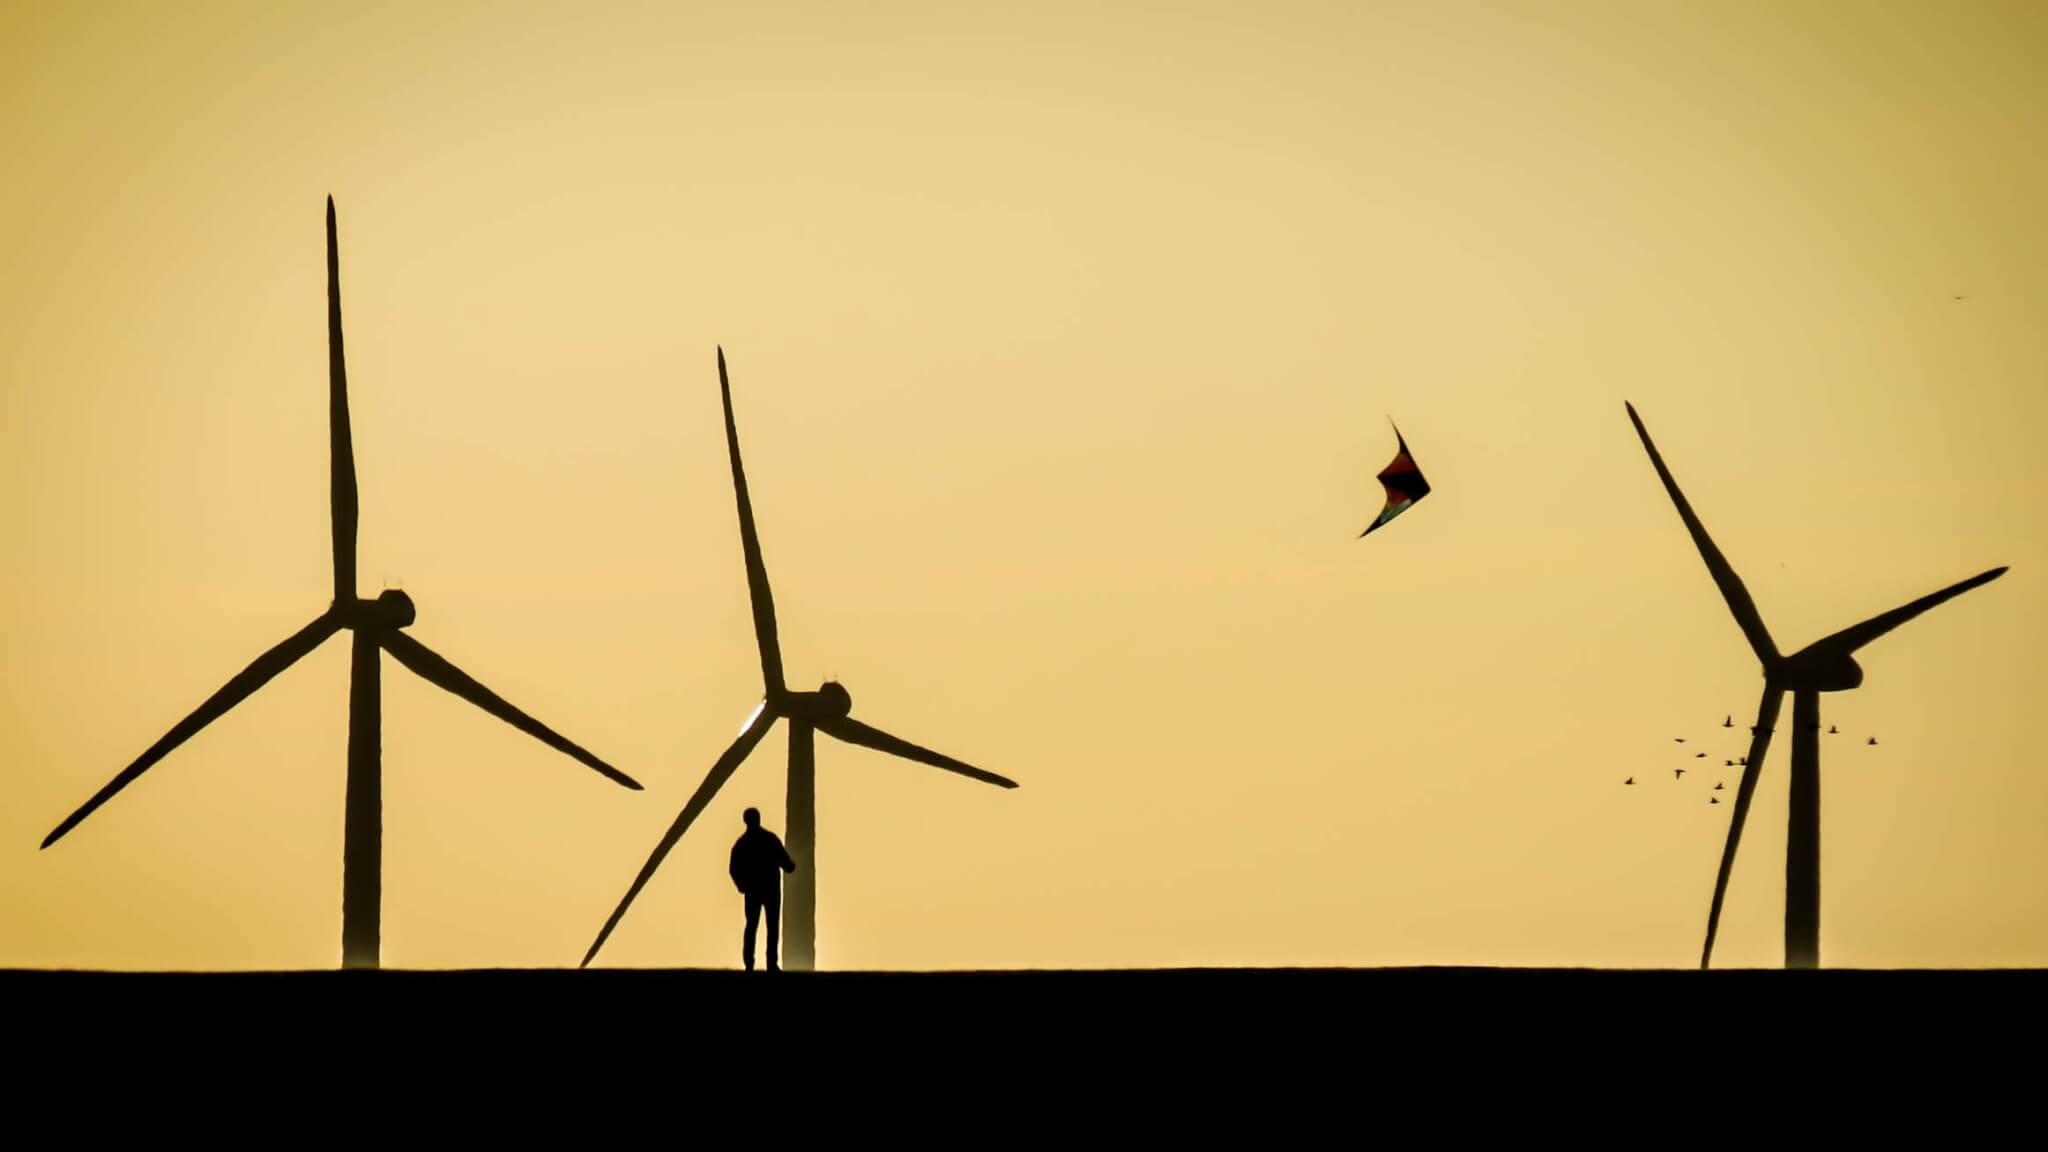 Three wind turbines silhouetted on the horizon as a man flies a kite.